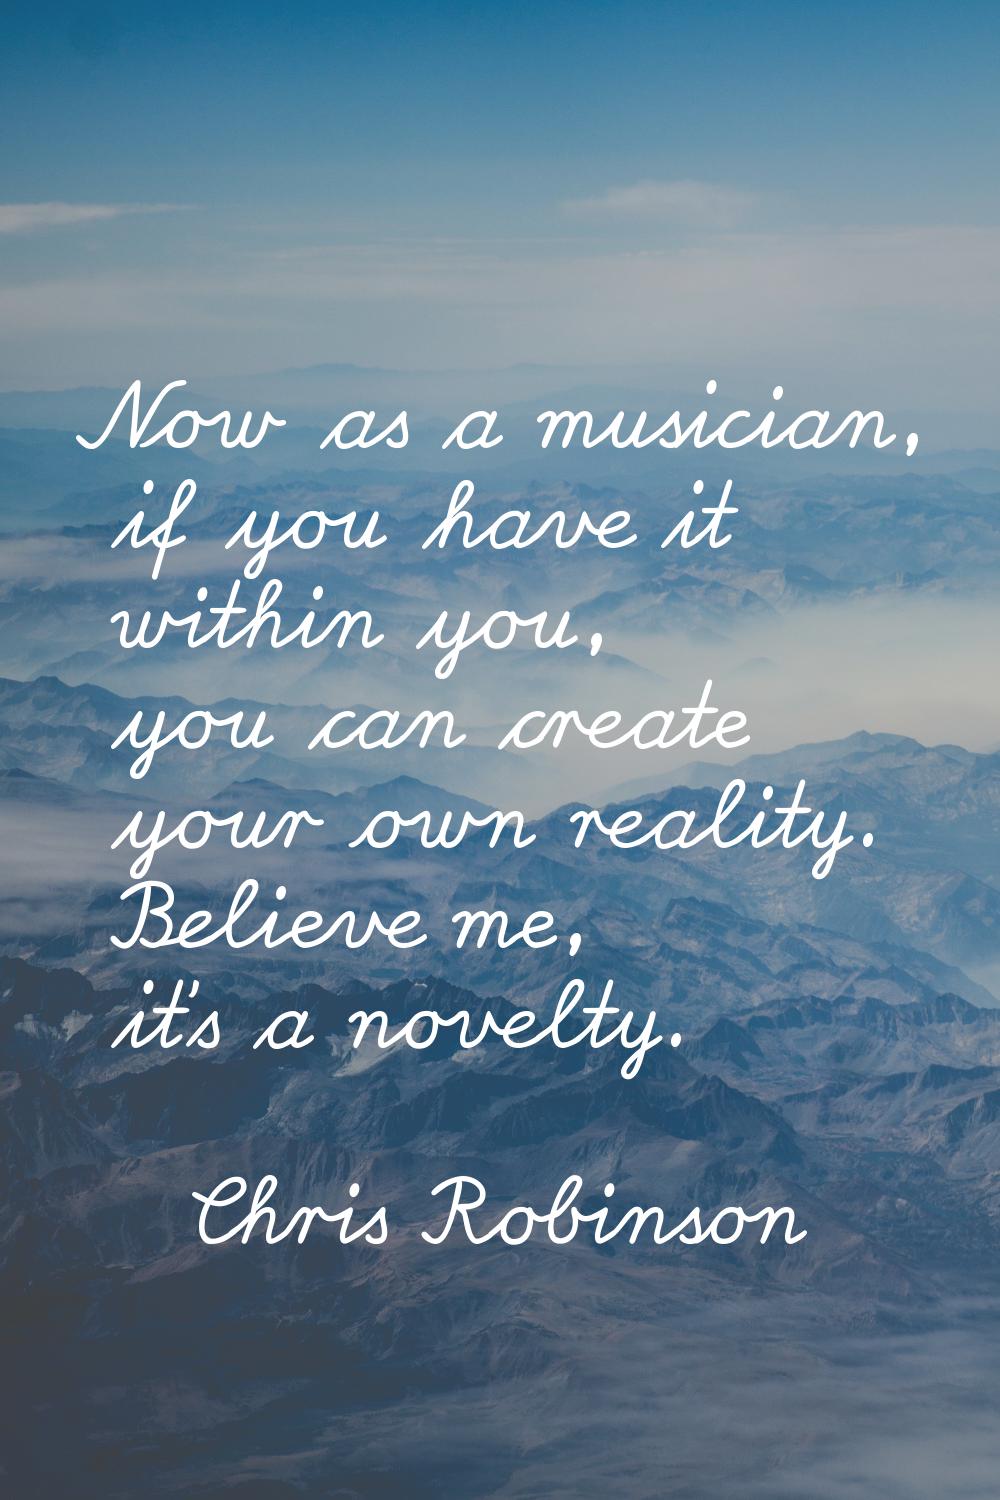 Now as a musician, if you have it within you, you can create your own reality. Believe me, it's a n